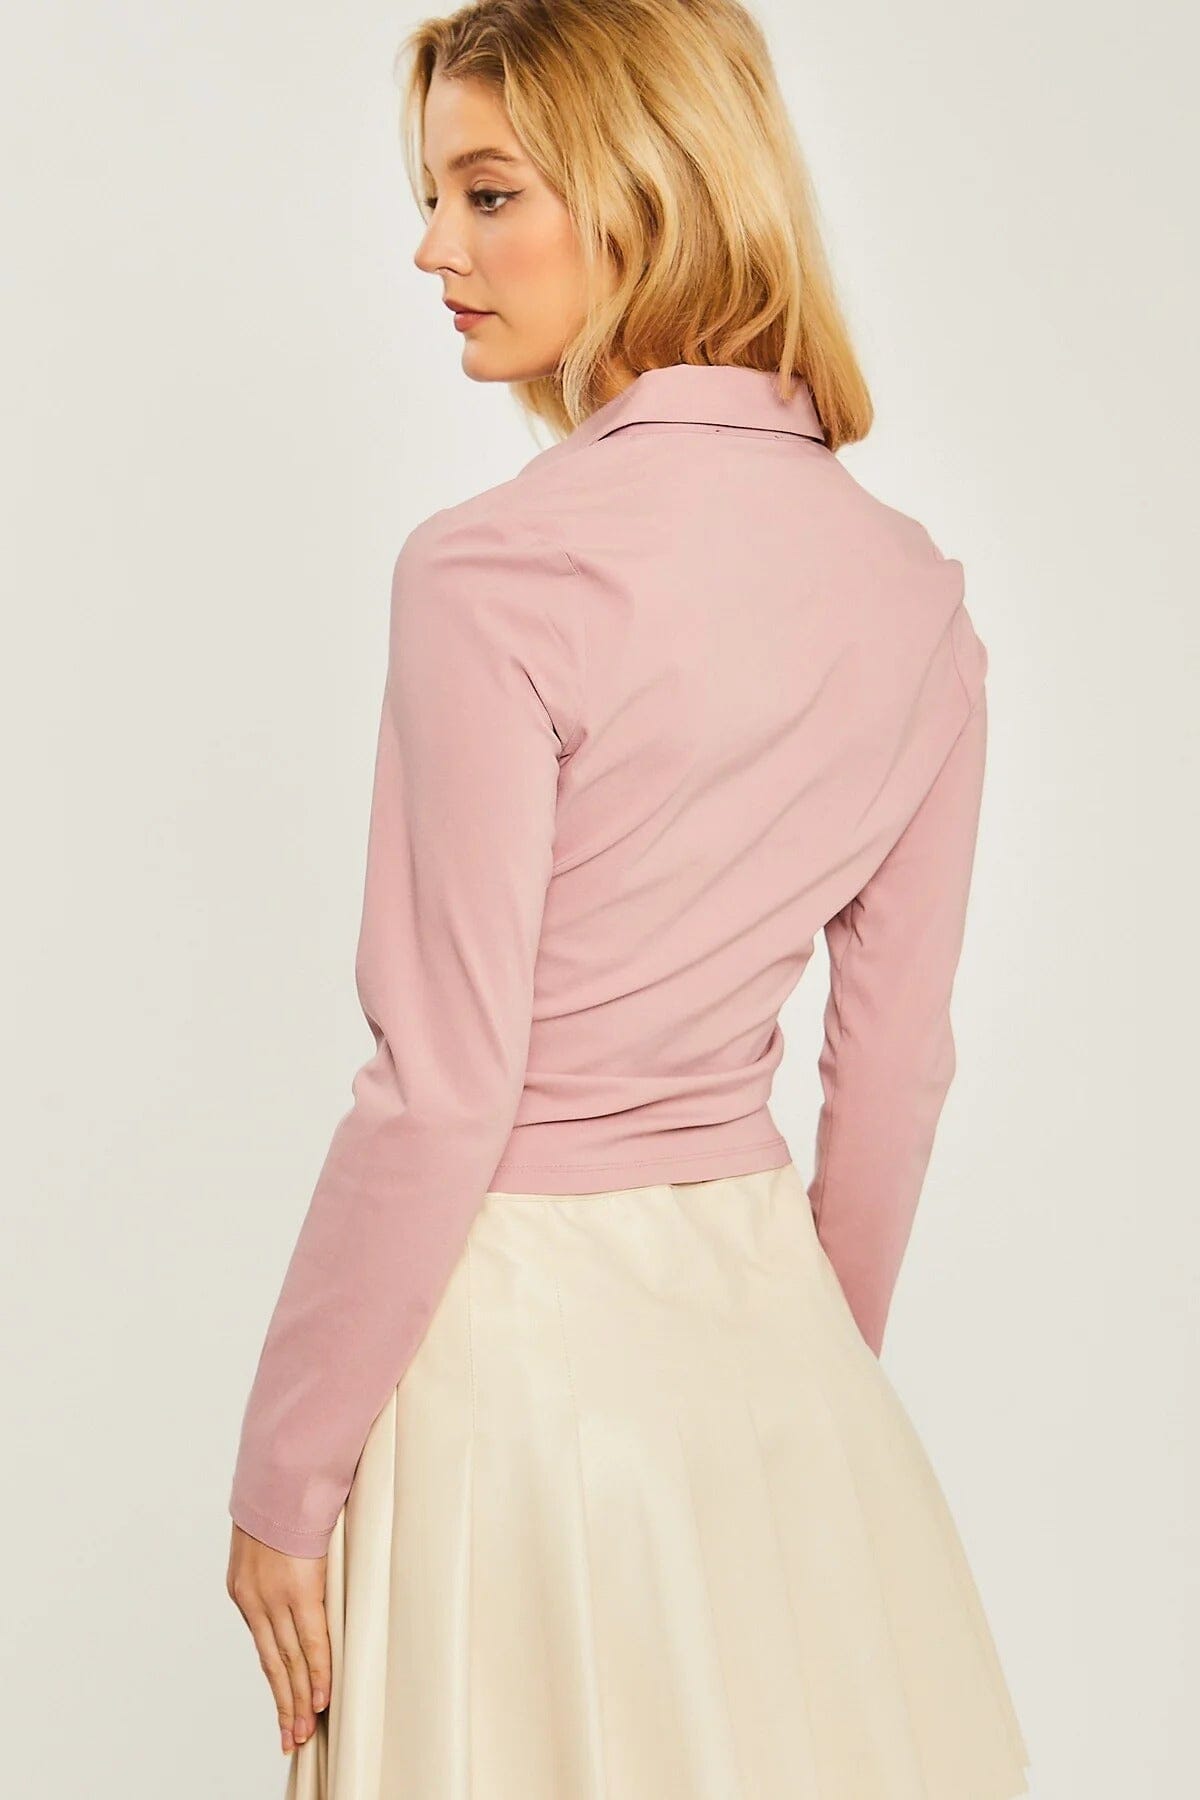 Mauve Pink Woven Ruched Front Button Down Collar Long Sleeve Slim Fit Crop Top Shirts Blouse Shirts & Tops jehouze 